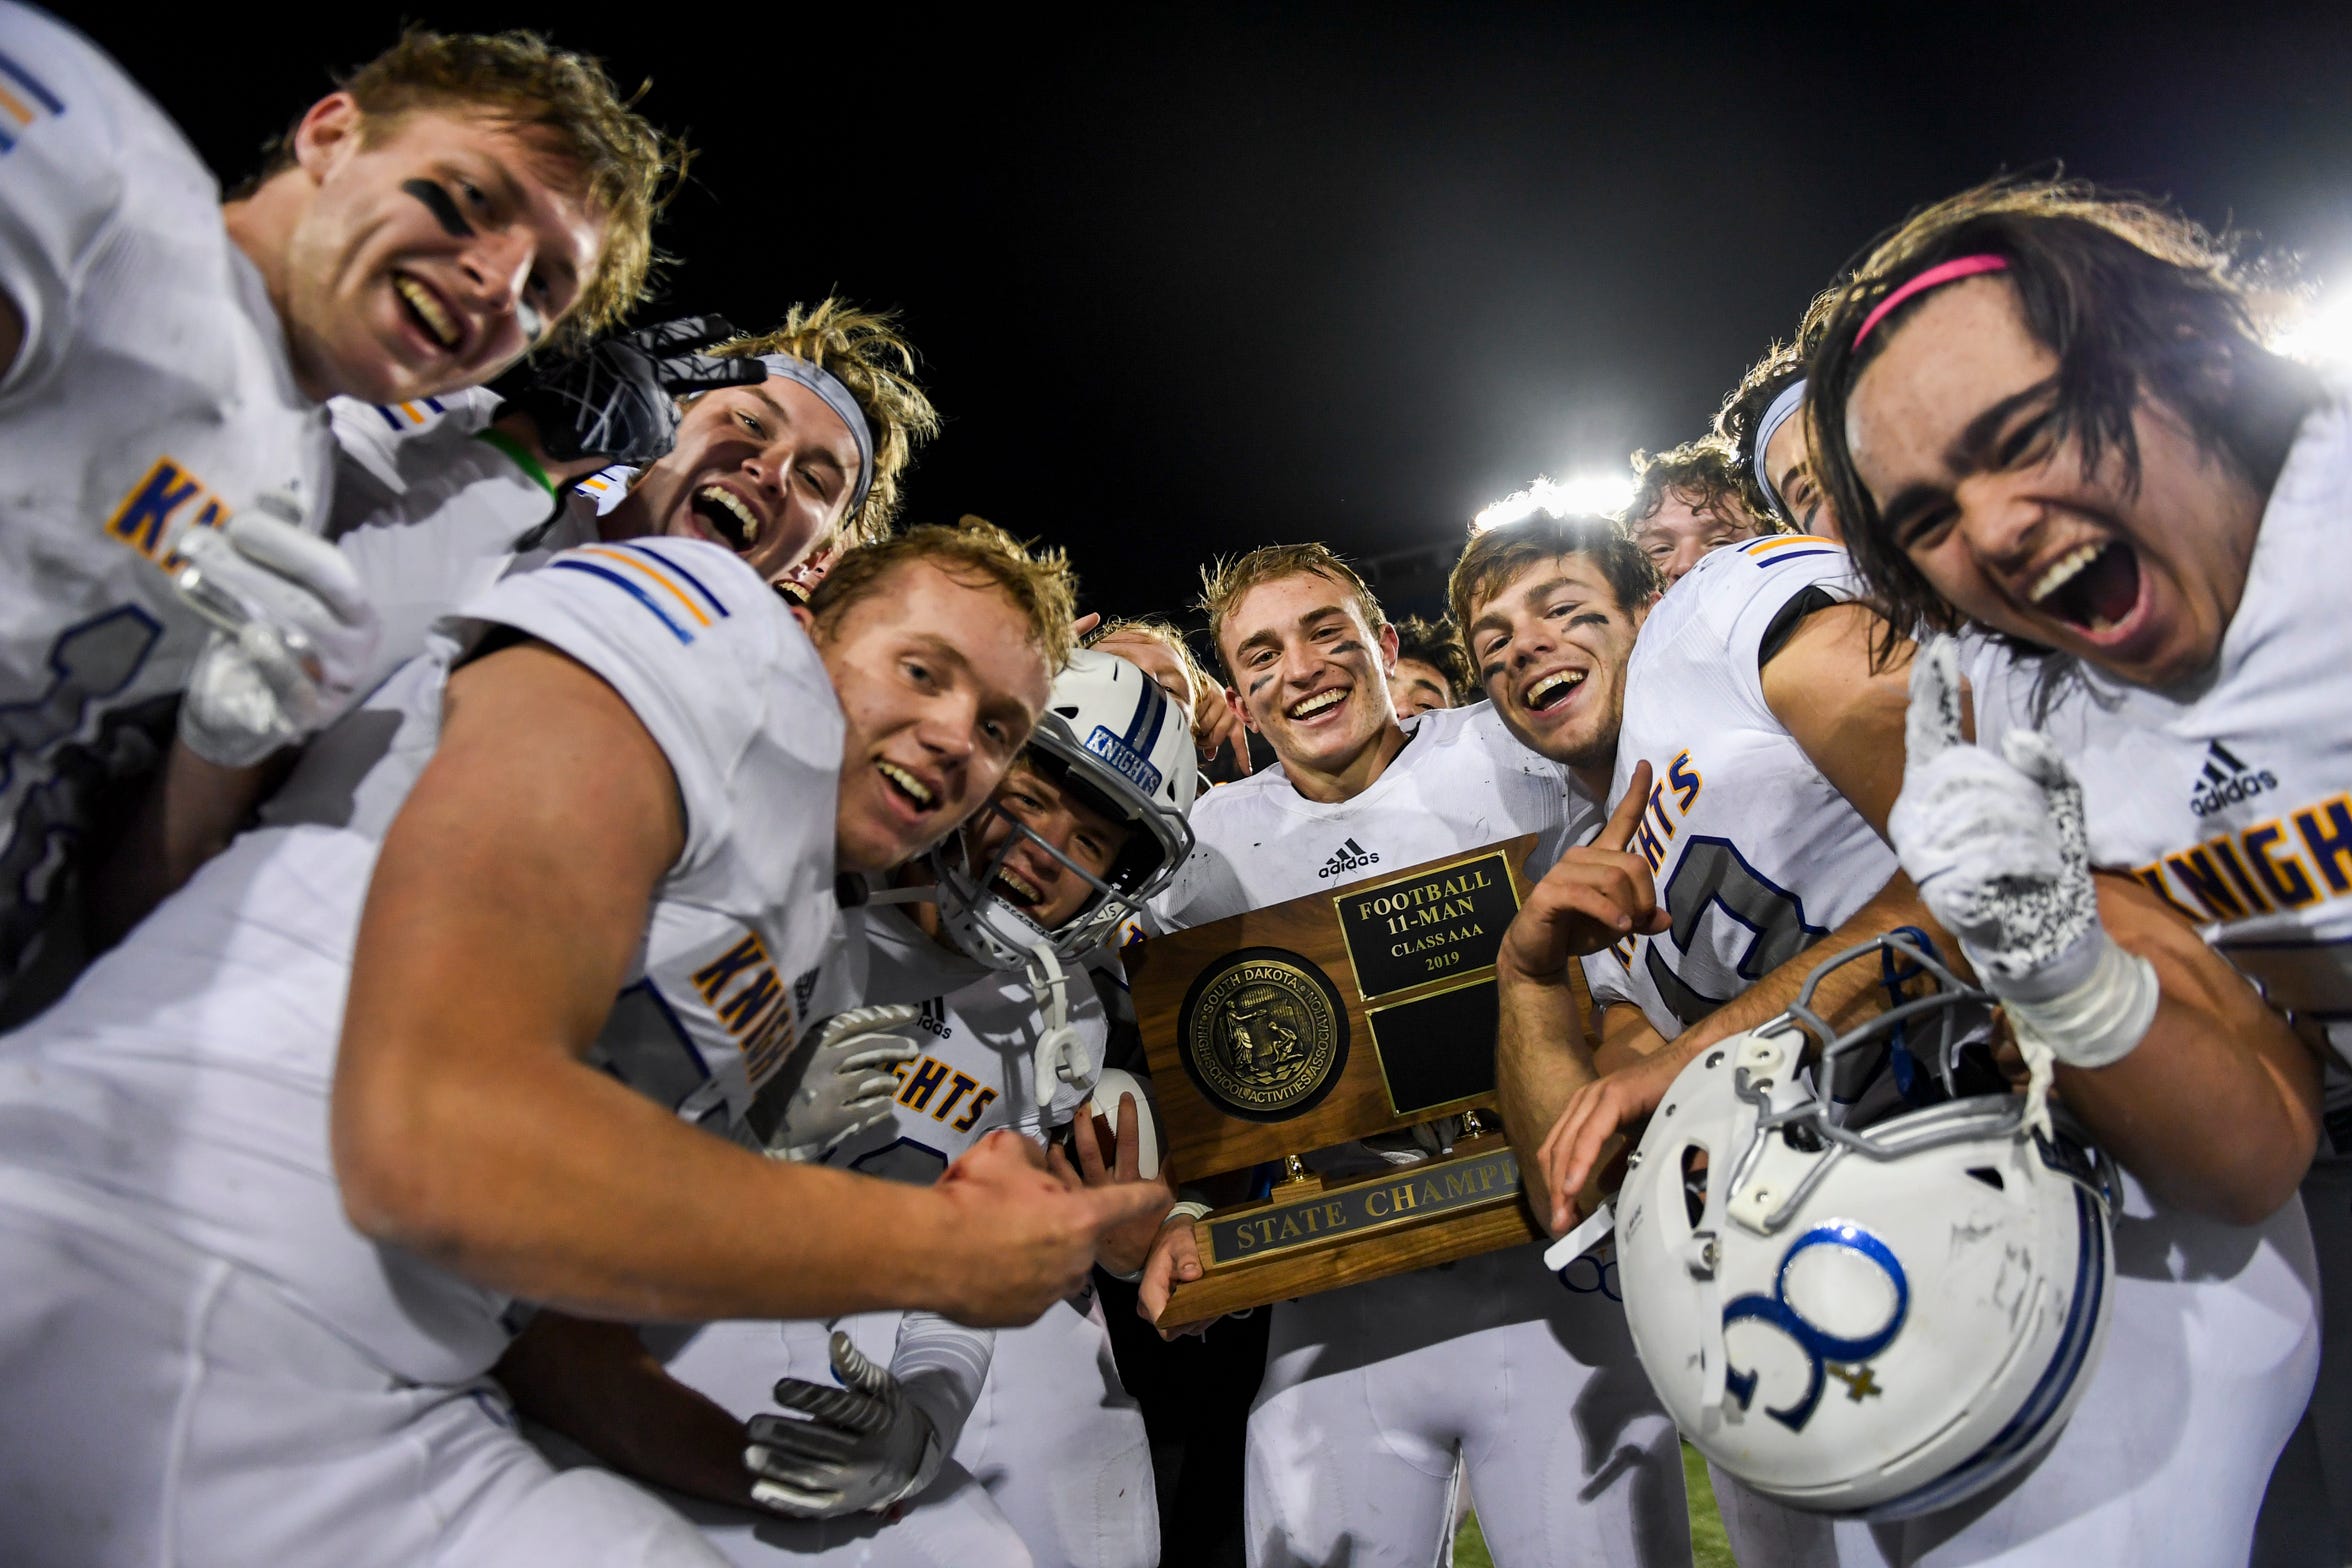 The O'Gorman Knights celebrate winning the Class 11AAA state championship against Brandon Valley on Friday, Nov. 15, 2019 at Dana J. Dykhouse Stadium in Brookings. The final score of the game was 21-16.